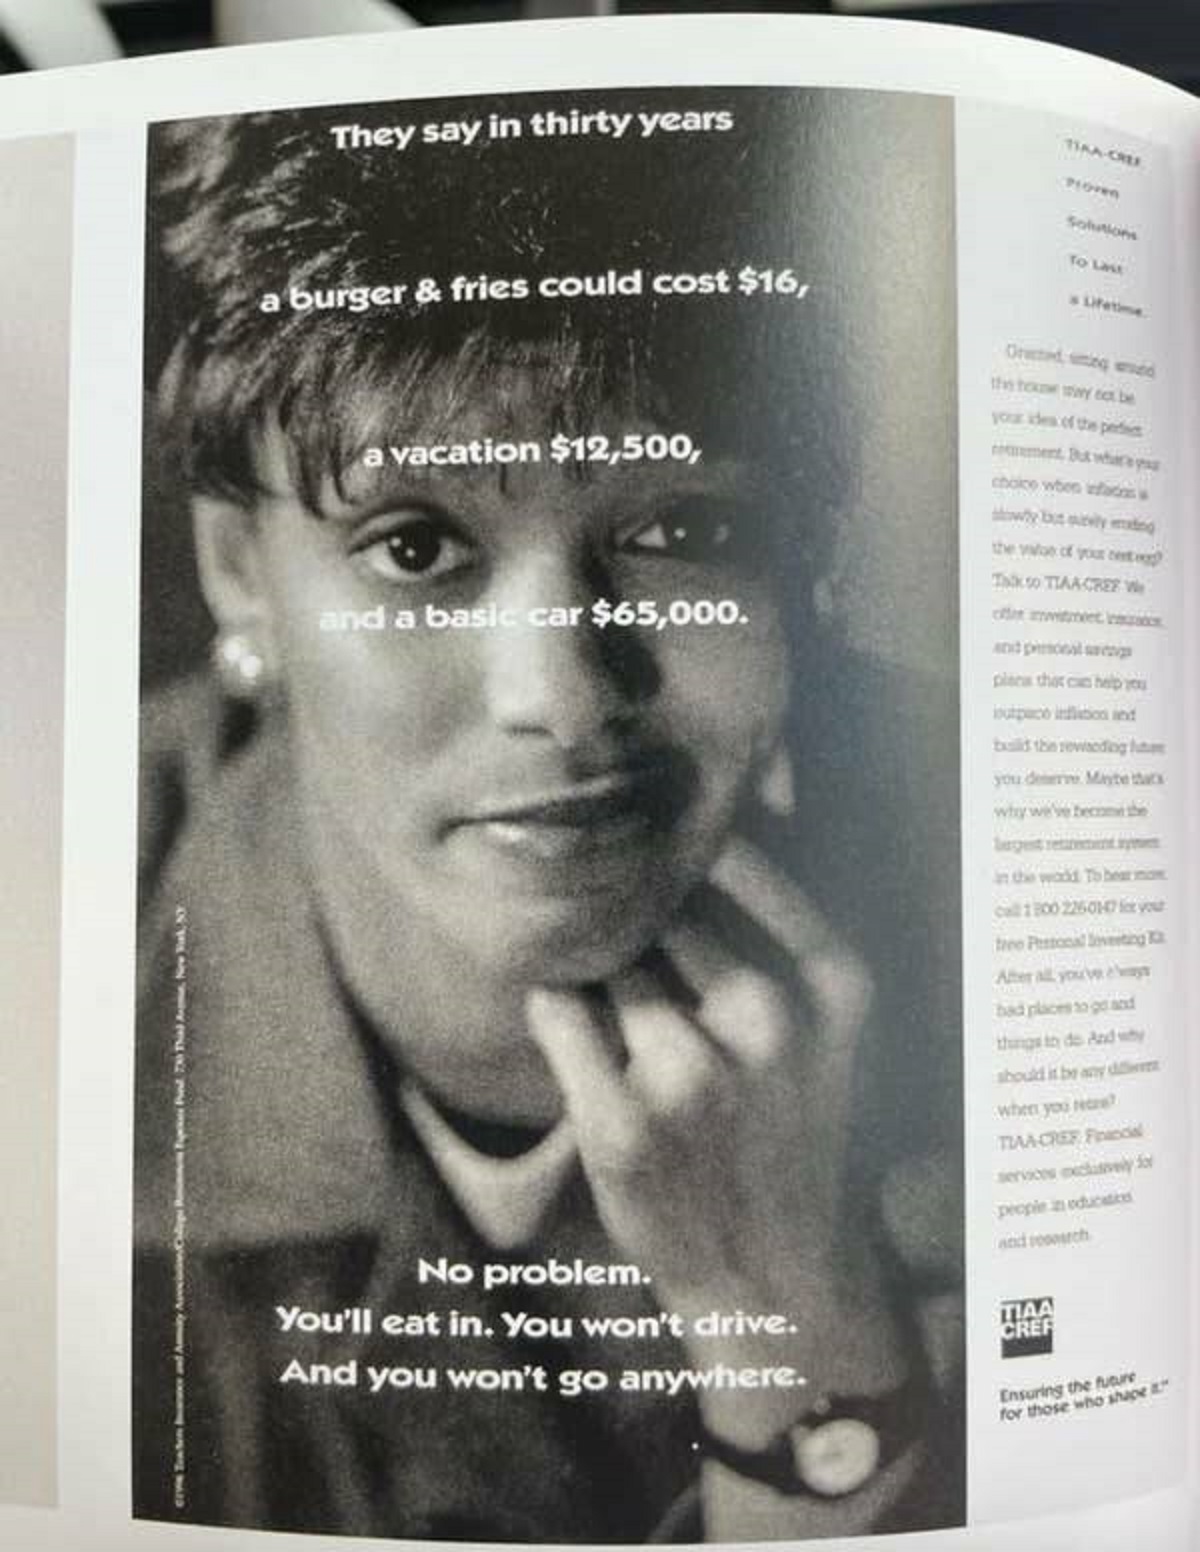 This ad from 1996.